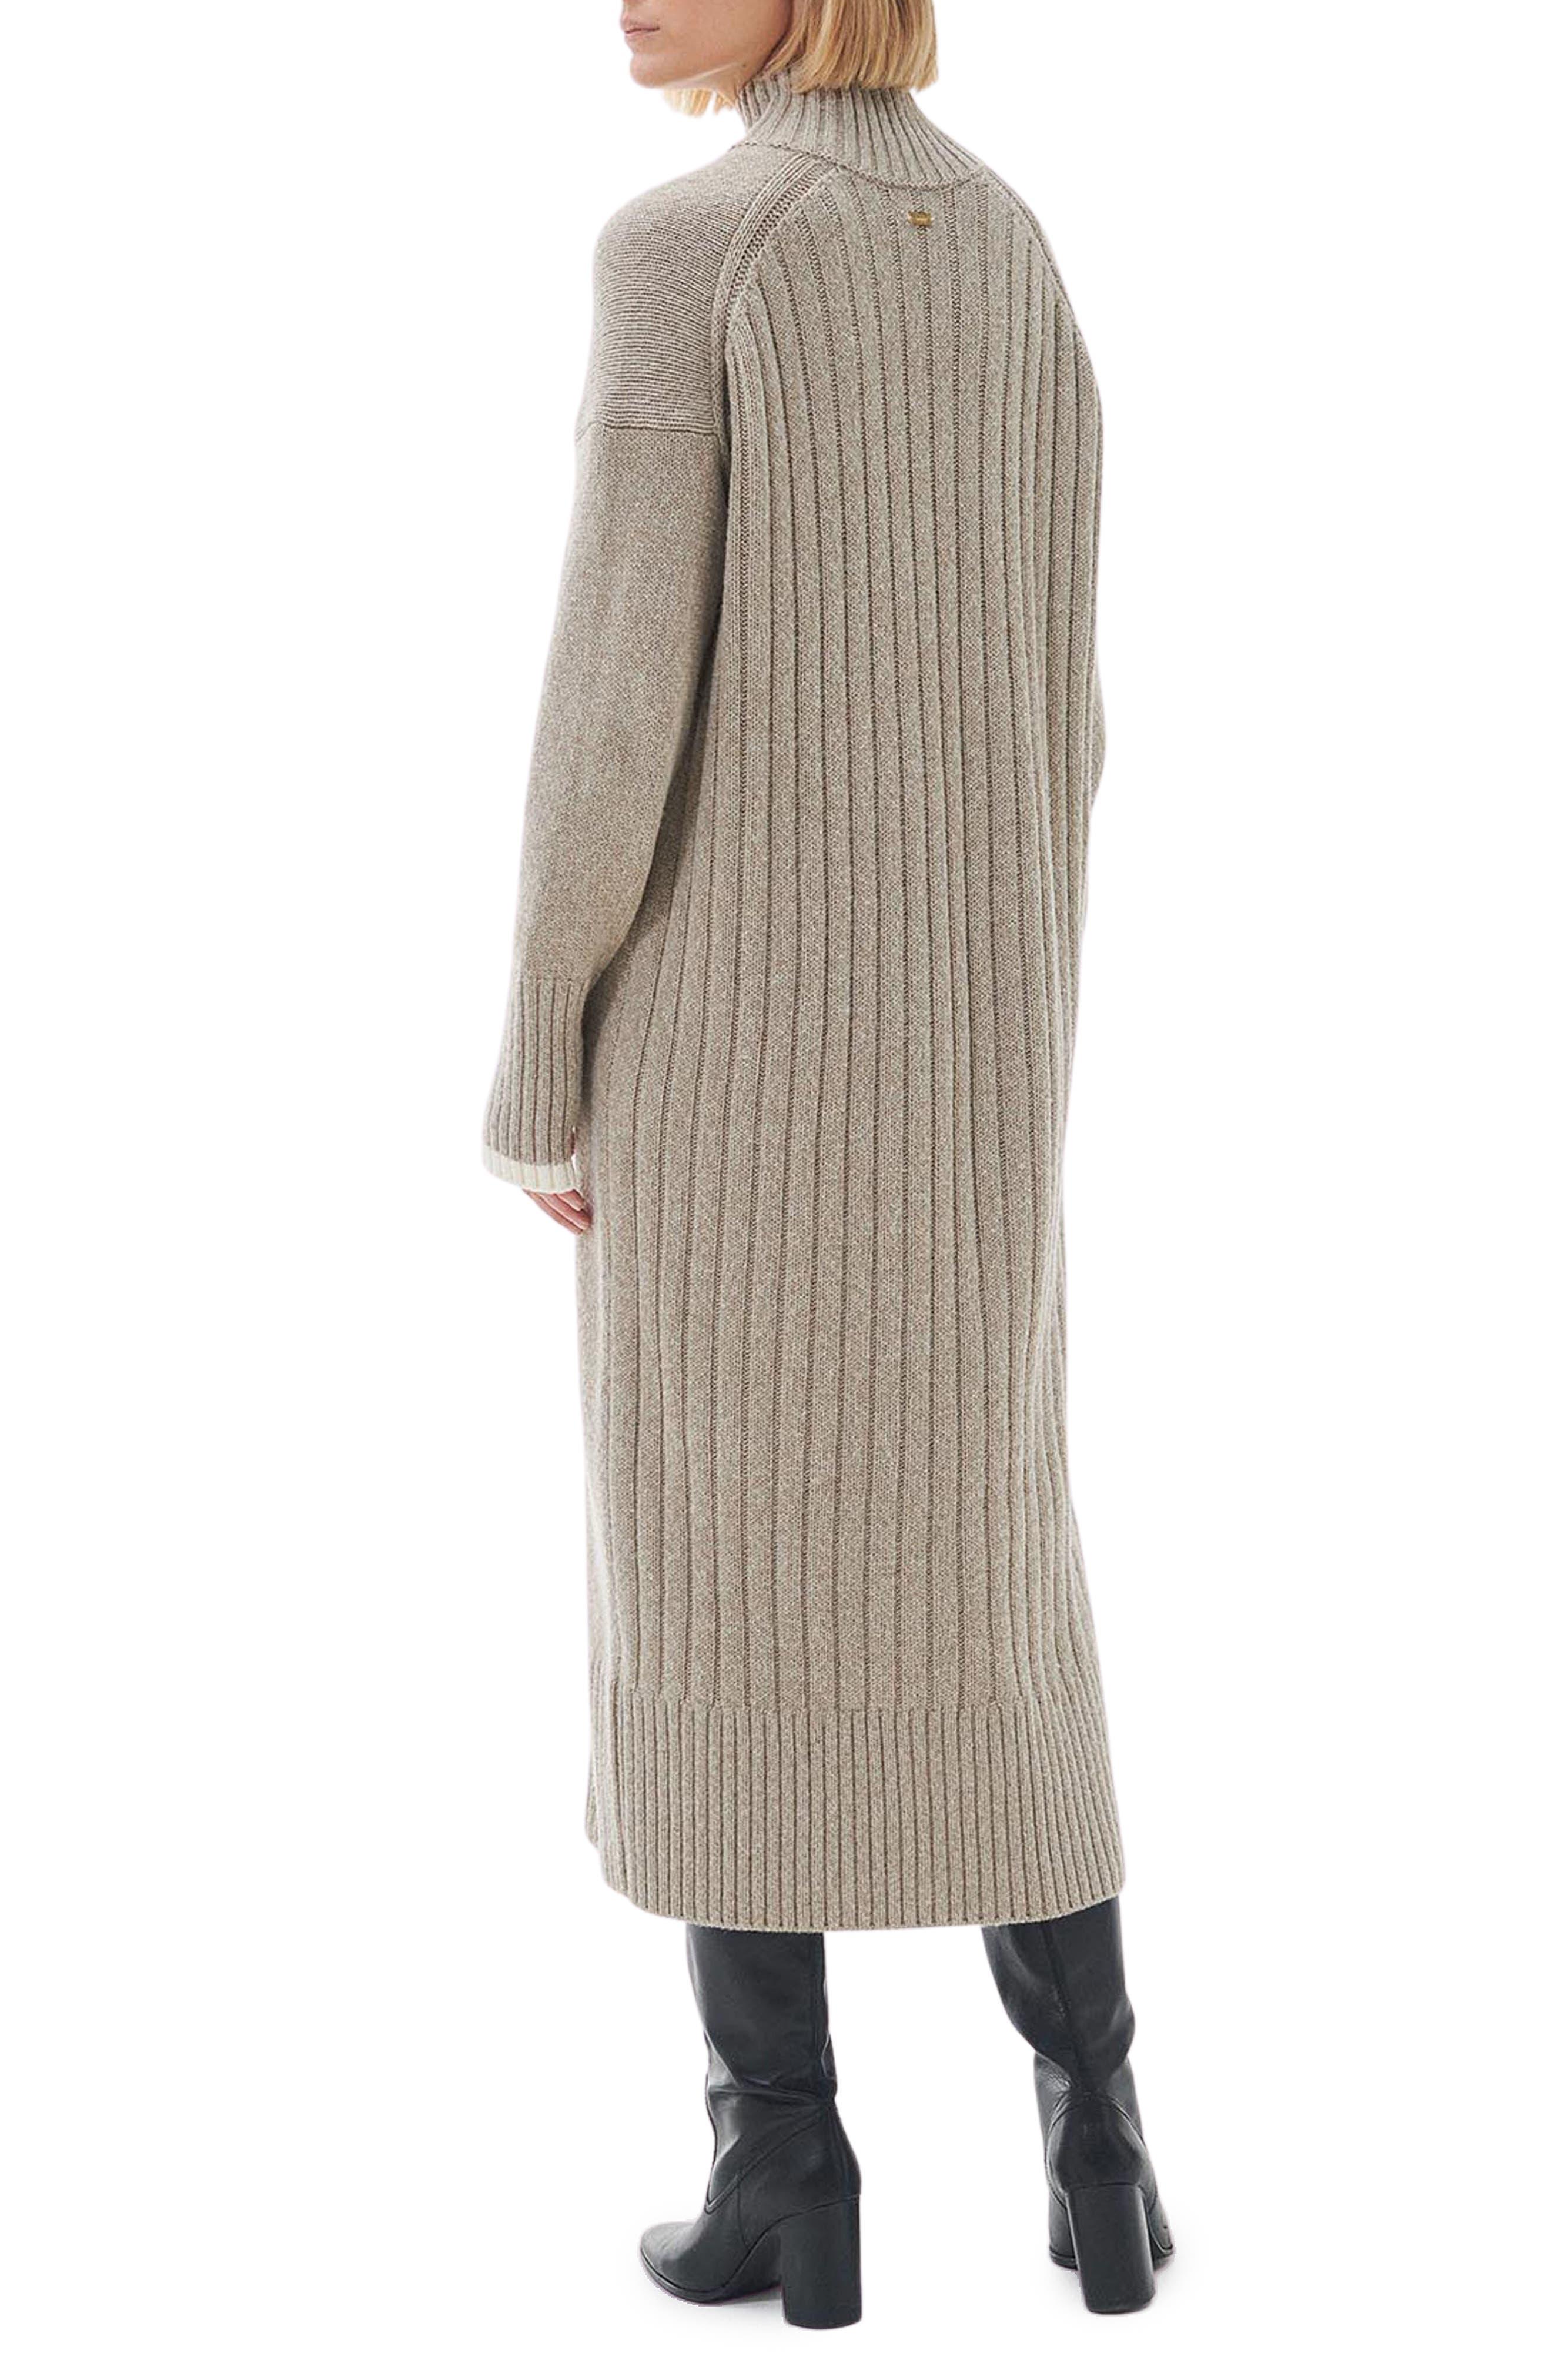 Barbour Winona Long Sleeve Midi Sweater Dress in Natural | Lyst